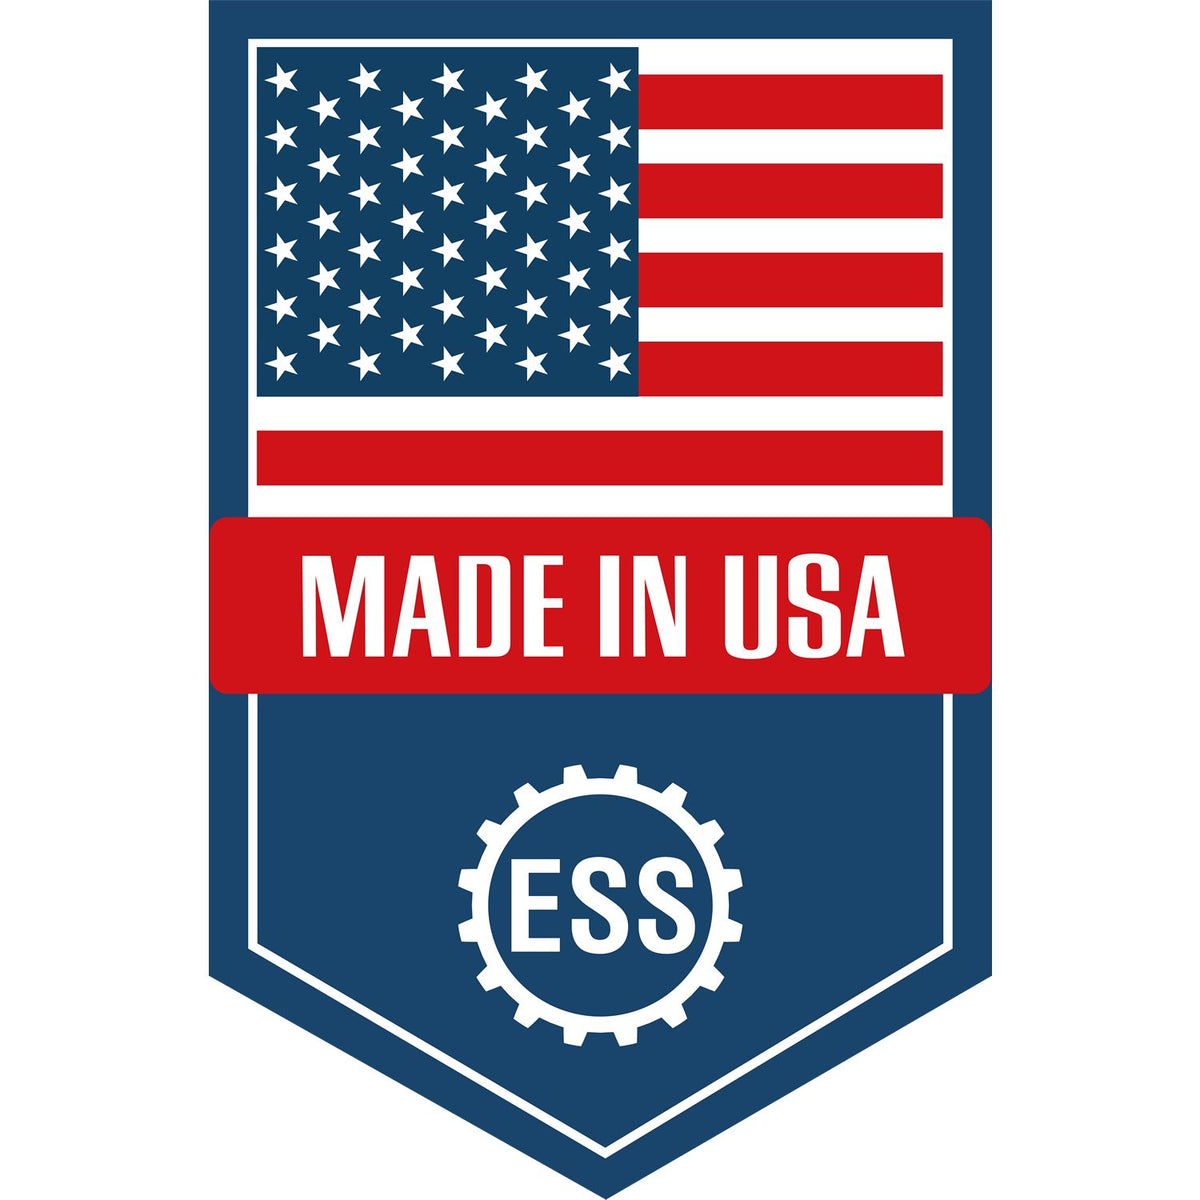 An icon or graphic with an american flag and text reading Made in USA for the Soft Montana Professional Geologist Seal